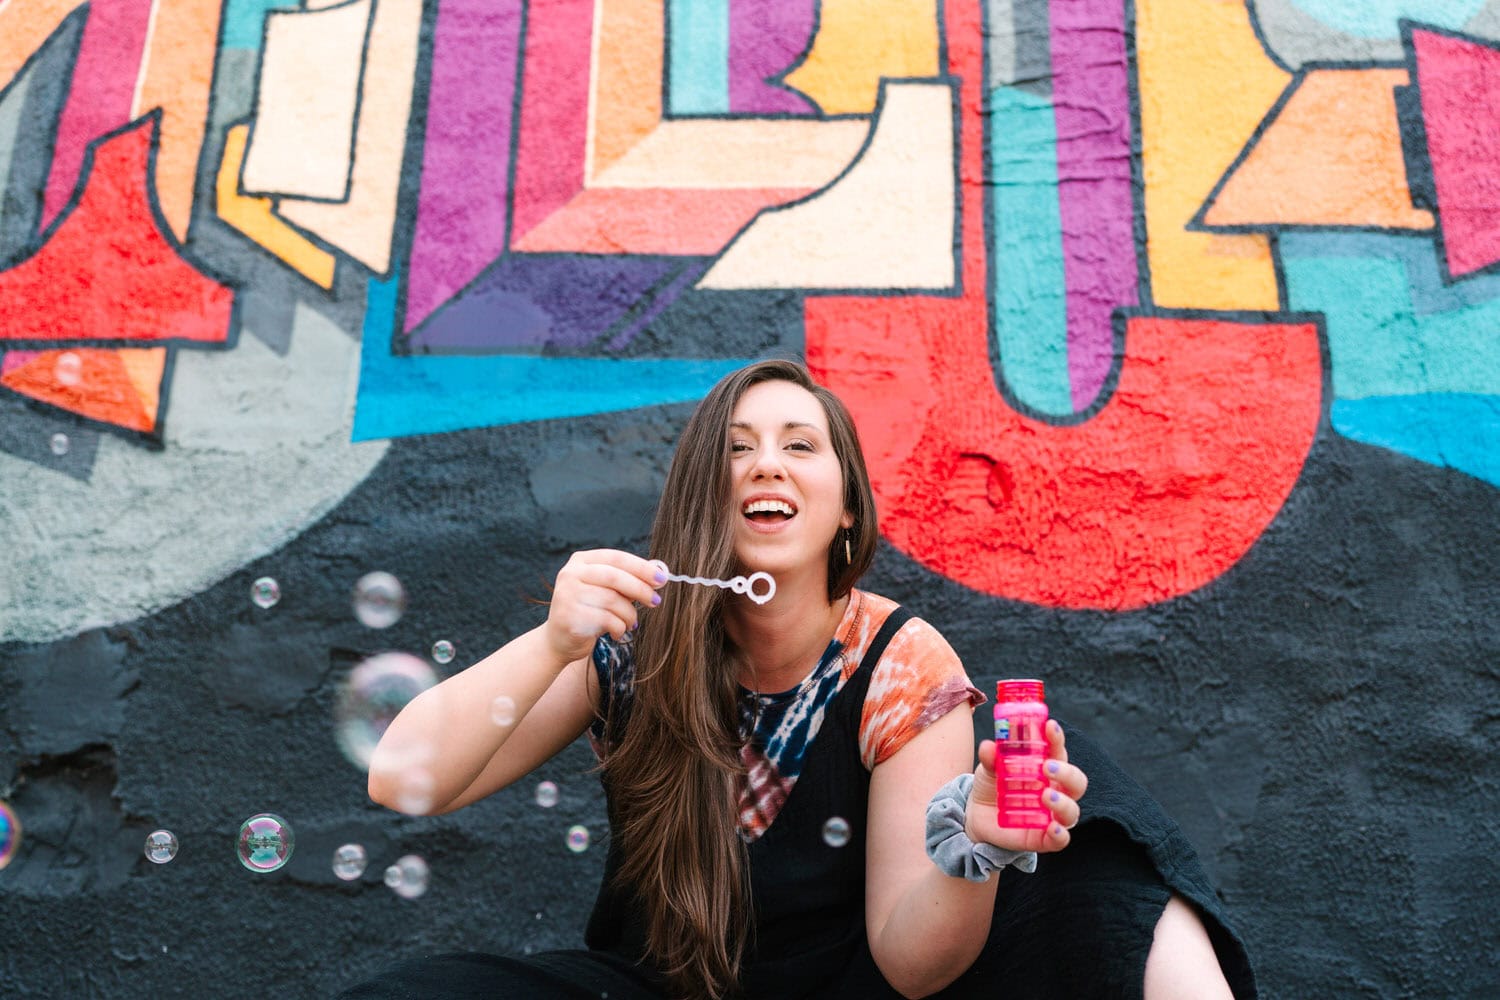 Daisy, a lifestyle photographer in Columbus Ohio, is wearing a tie-dye shirt and blowing bubbles in front of a colorful painted wall